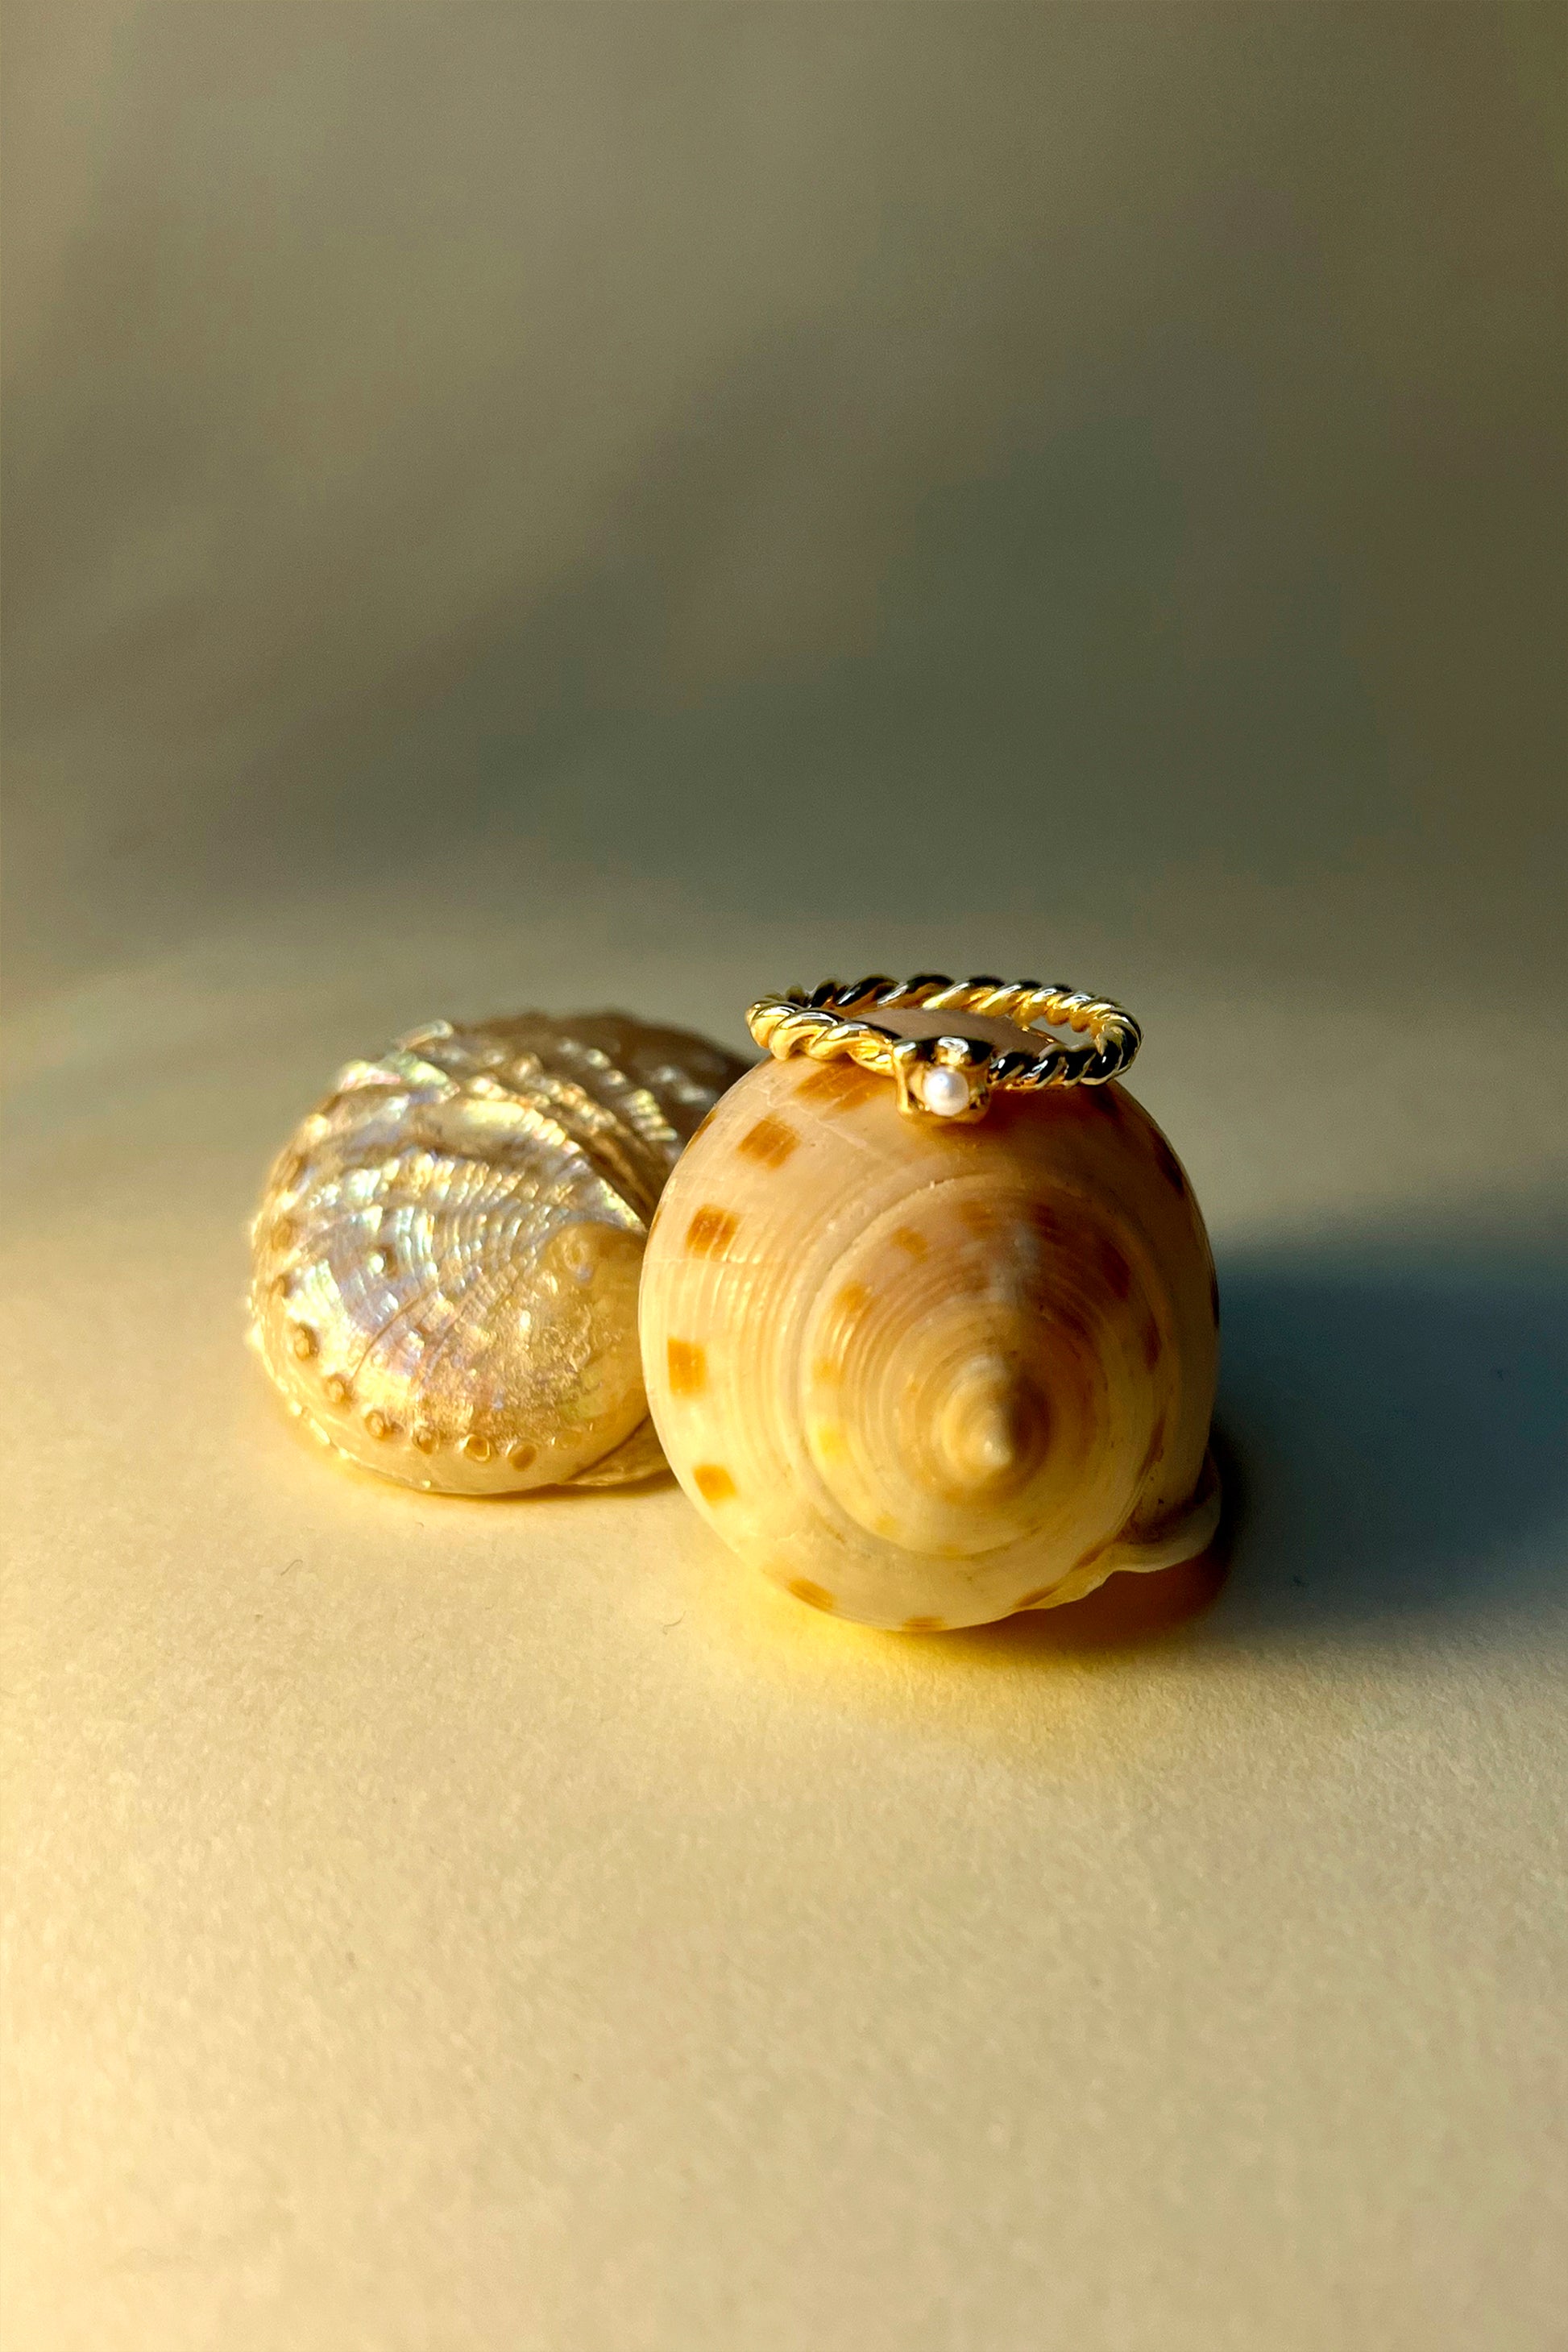 Dainty sea-inspired Mini Mermaid Ring by CLARK on top of a shell, showing off high quality lustrous Pearl. Bathed in gold, this unique gift evokes mermaid jewelry. The ring is handcraft using the lost-wax casting method, each ring is artisanal, made by an artist in Brooklyn.